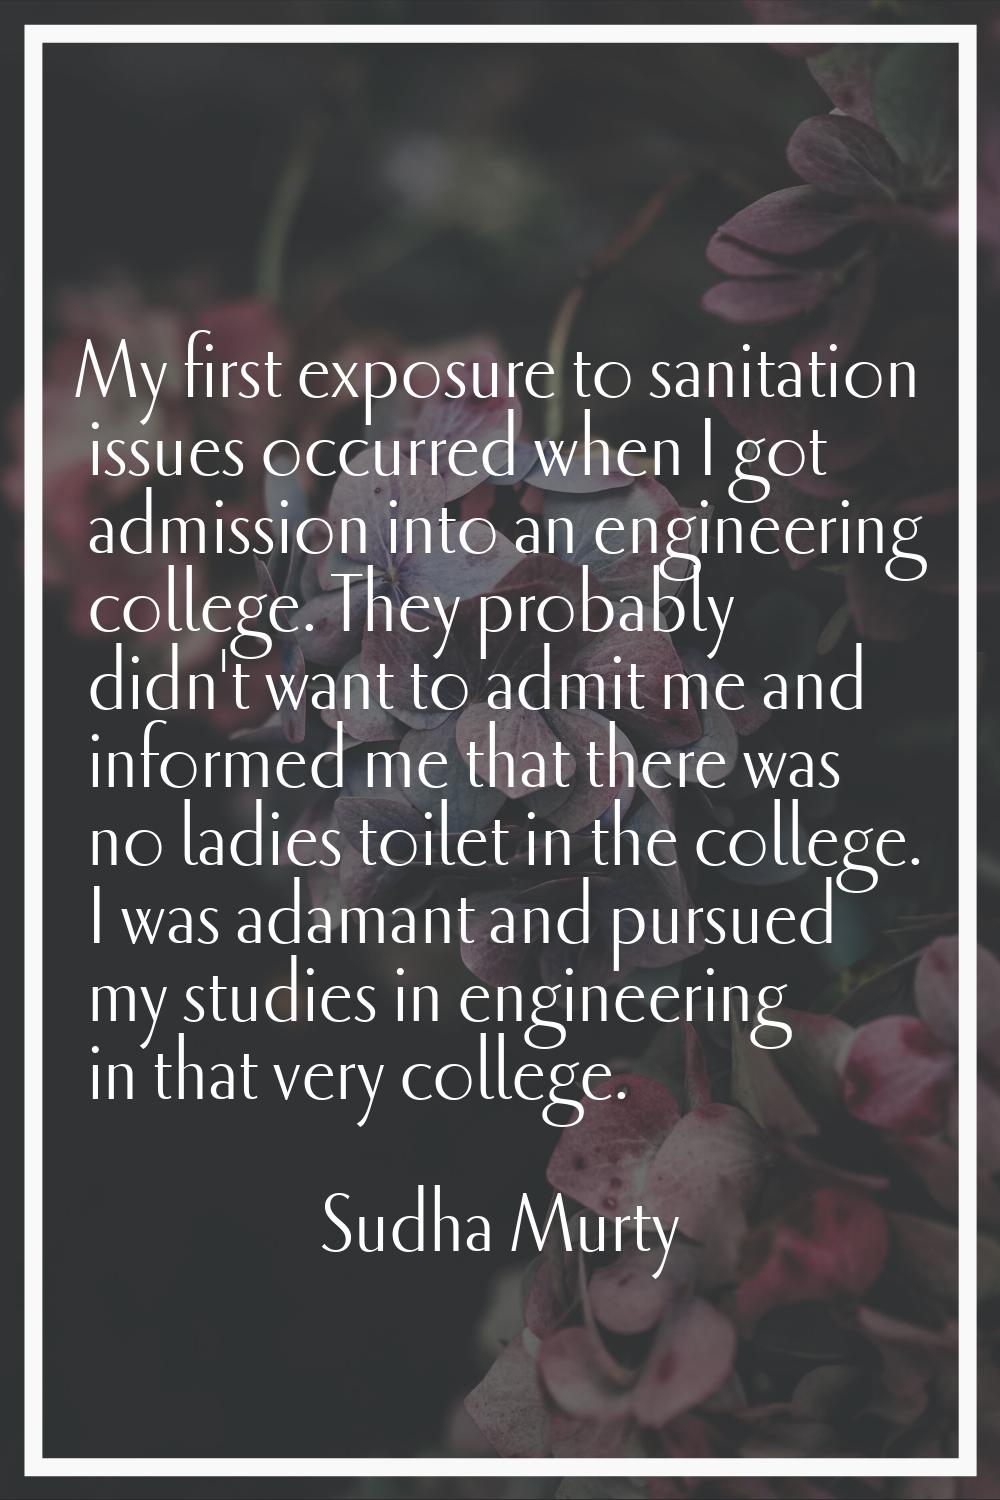 My first exposure to sanitation issues occurred when I got admission into an engineering college. T